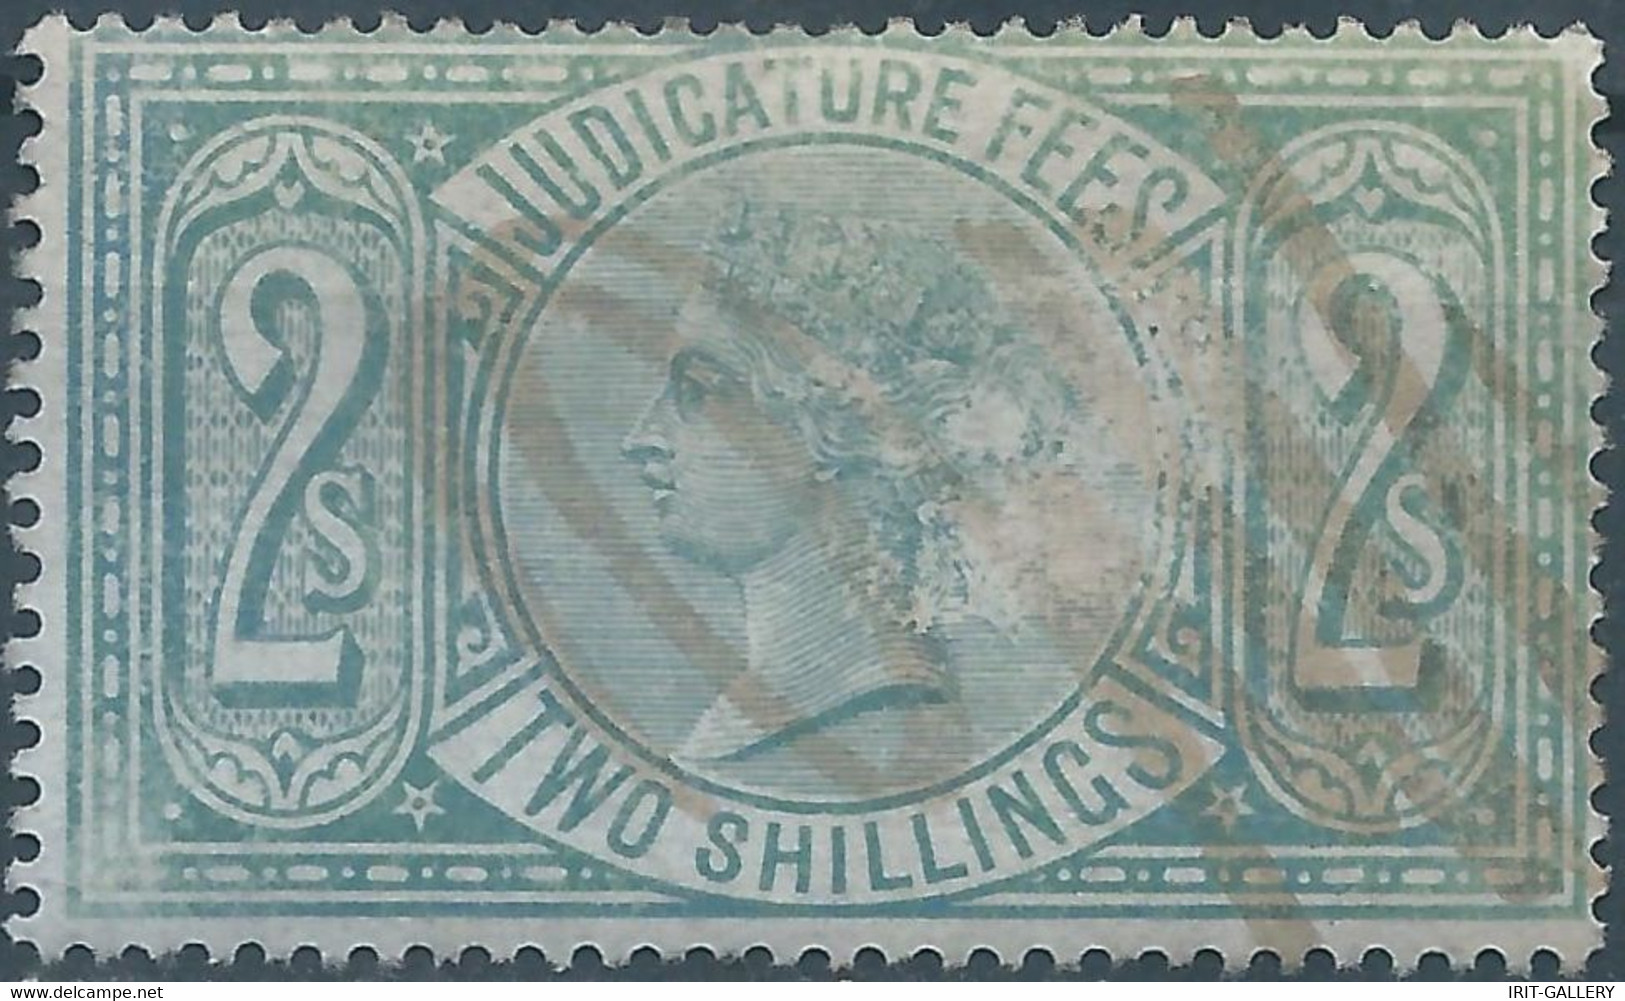 Great Britain-ENGLAND,Queen Victoria,1880-1900 Revenue Stamp Tax Fiscal,JUDICATURE FEES,2 Shillings,Used - Fiscale Zegels